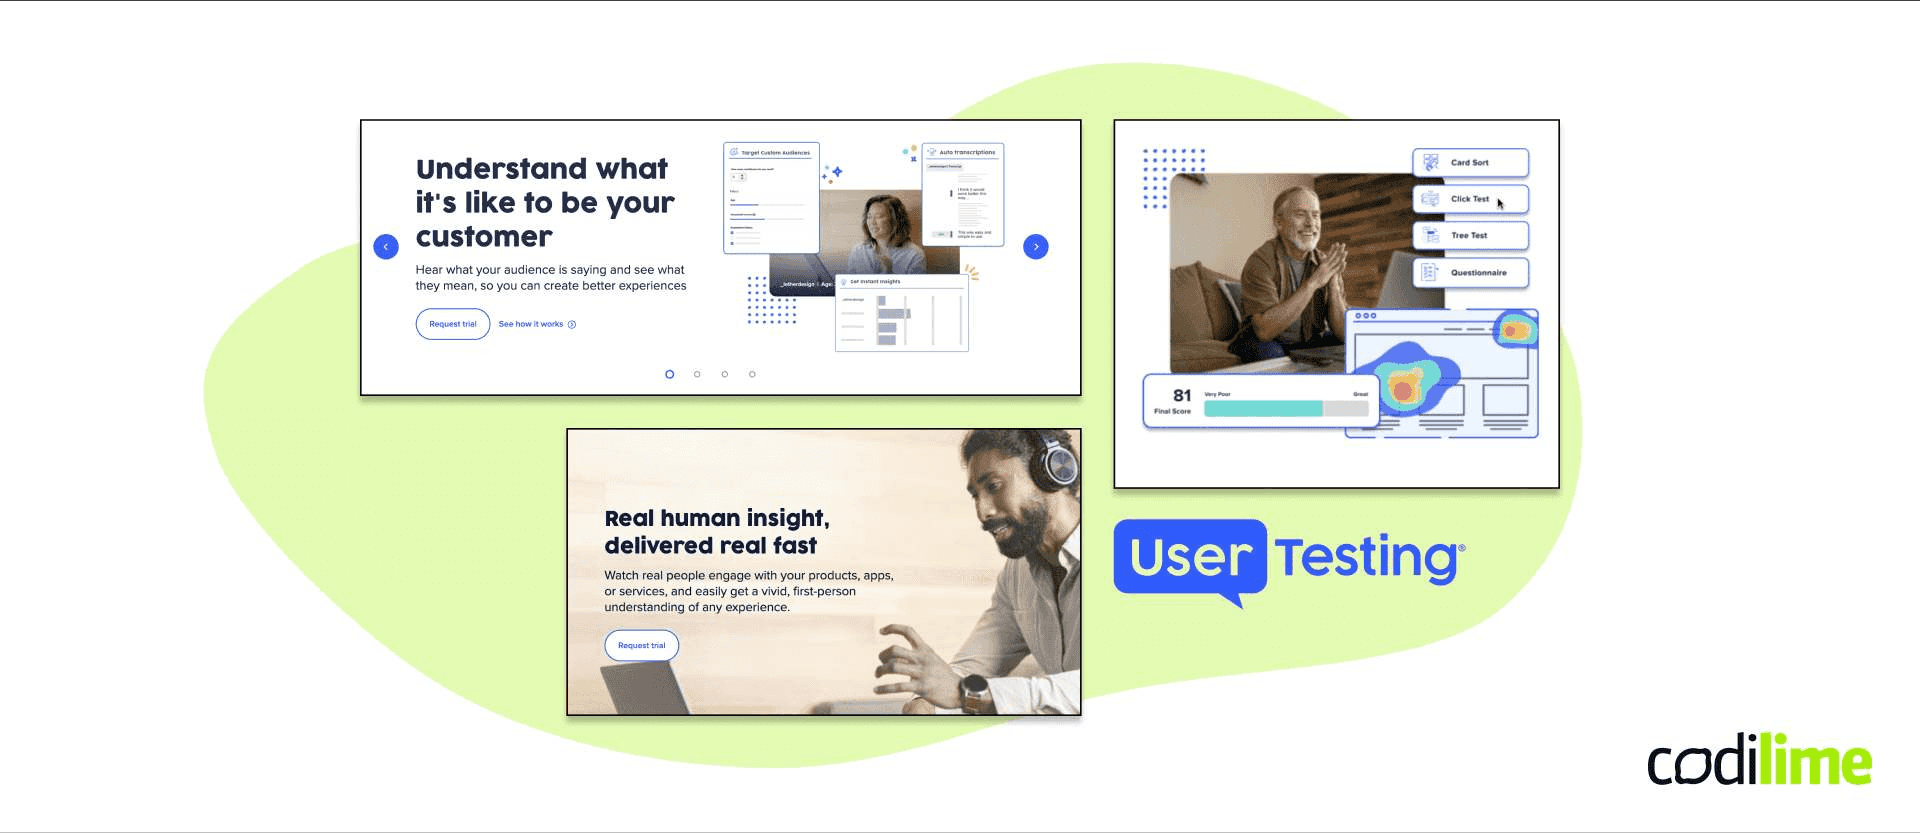  Tools for prototyping - UserTesting